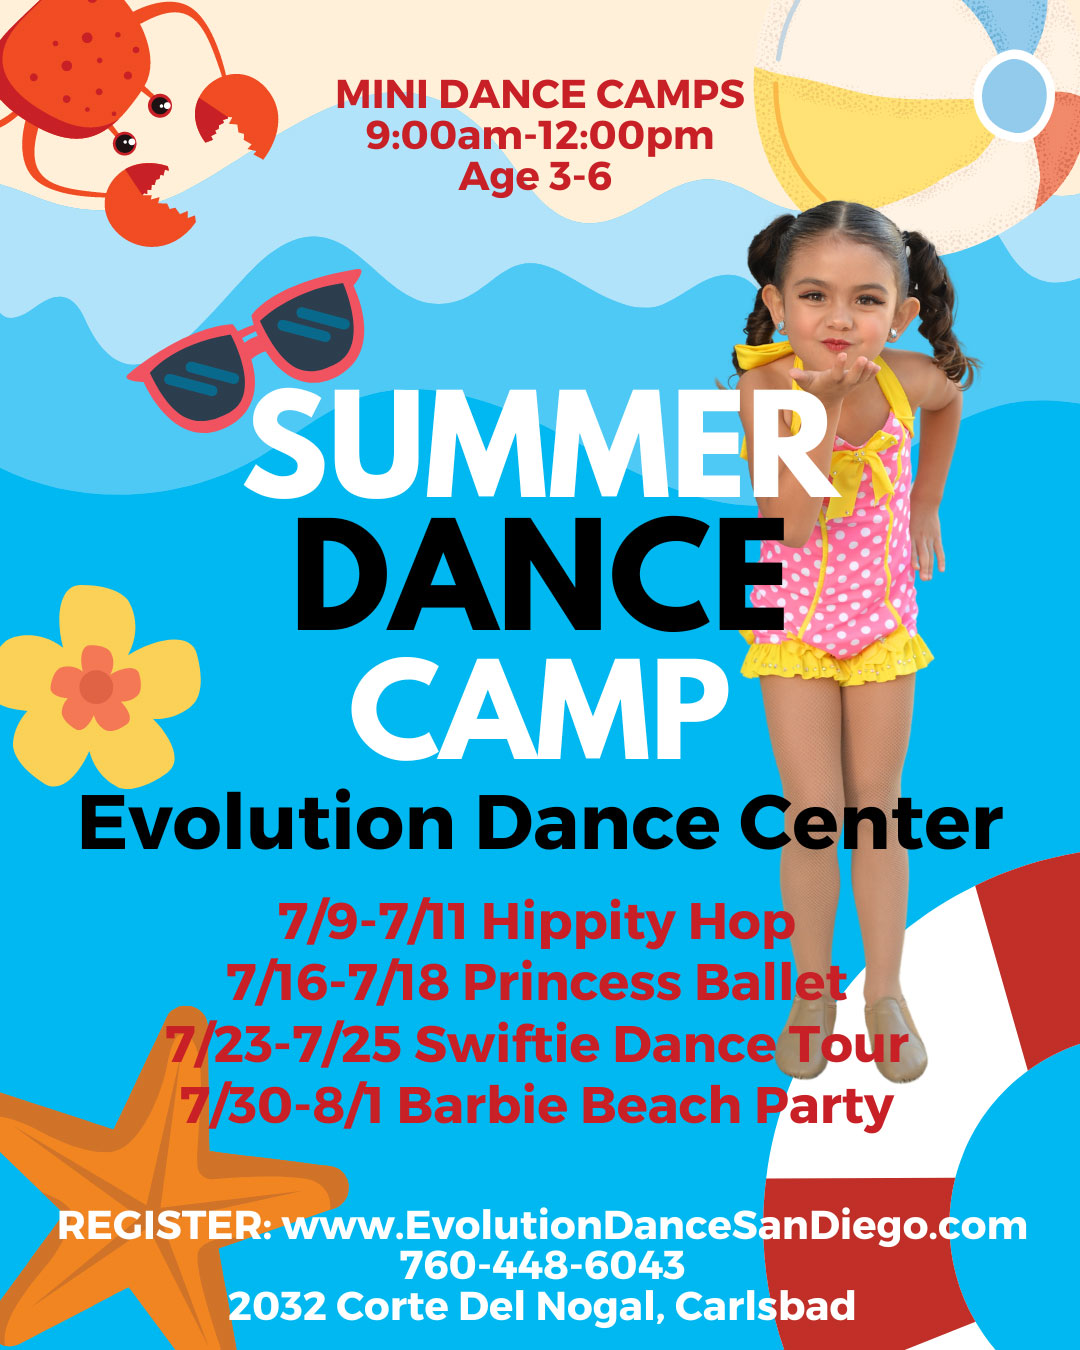 Summer Dance Camp flyer with young girl in bathing suit.